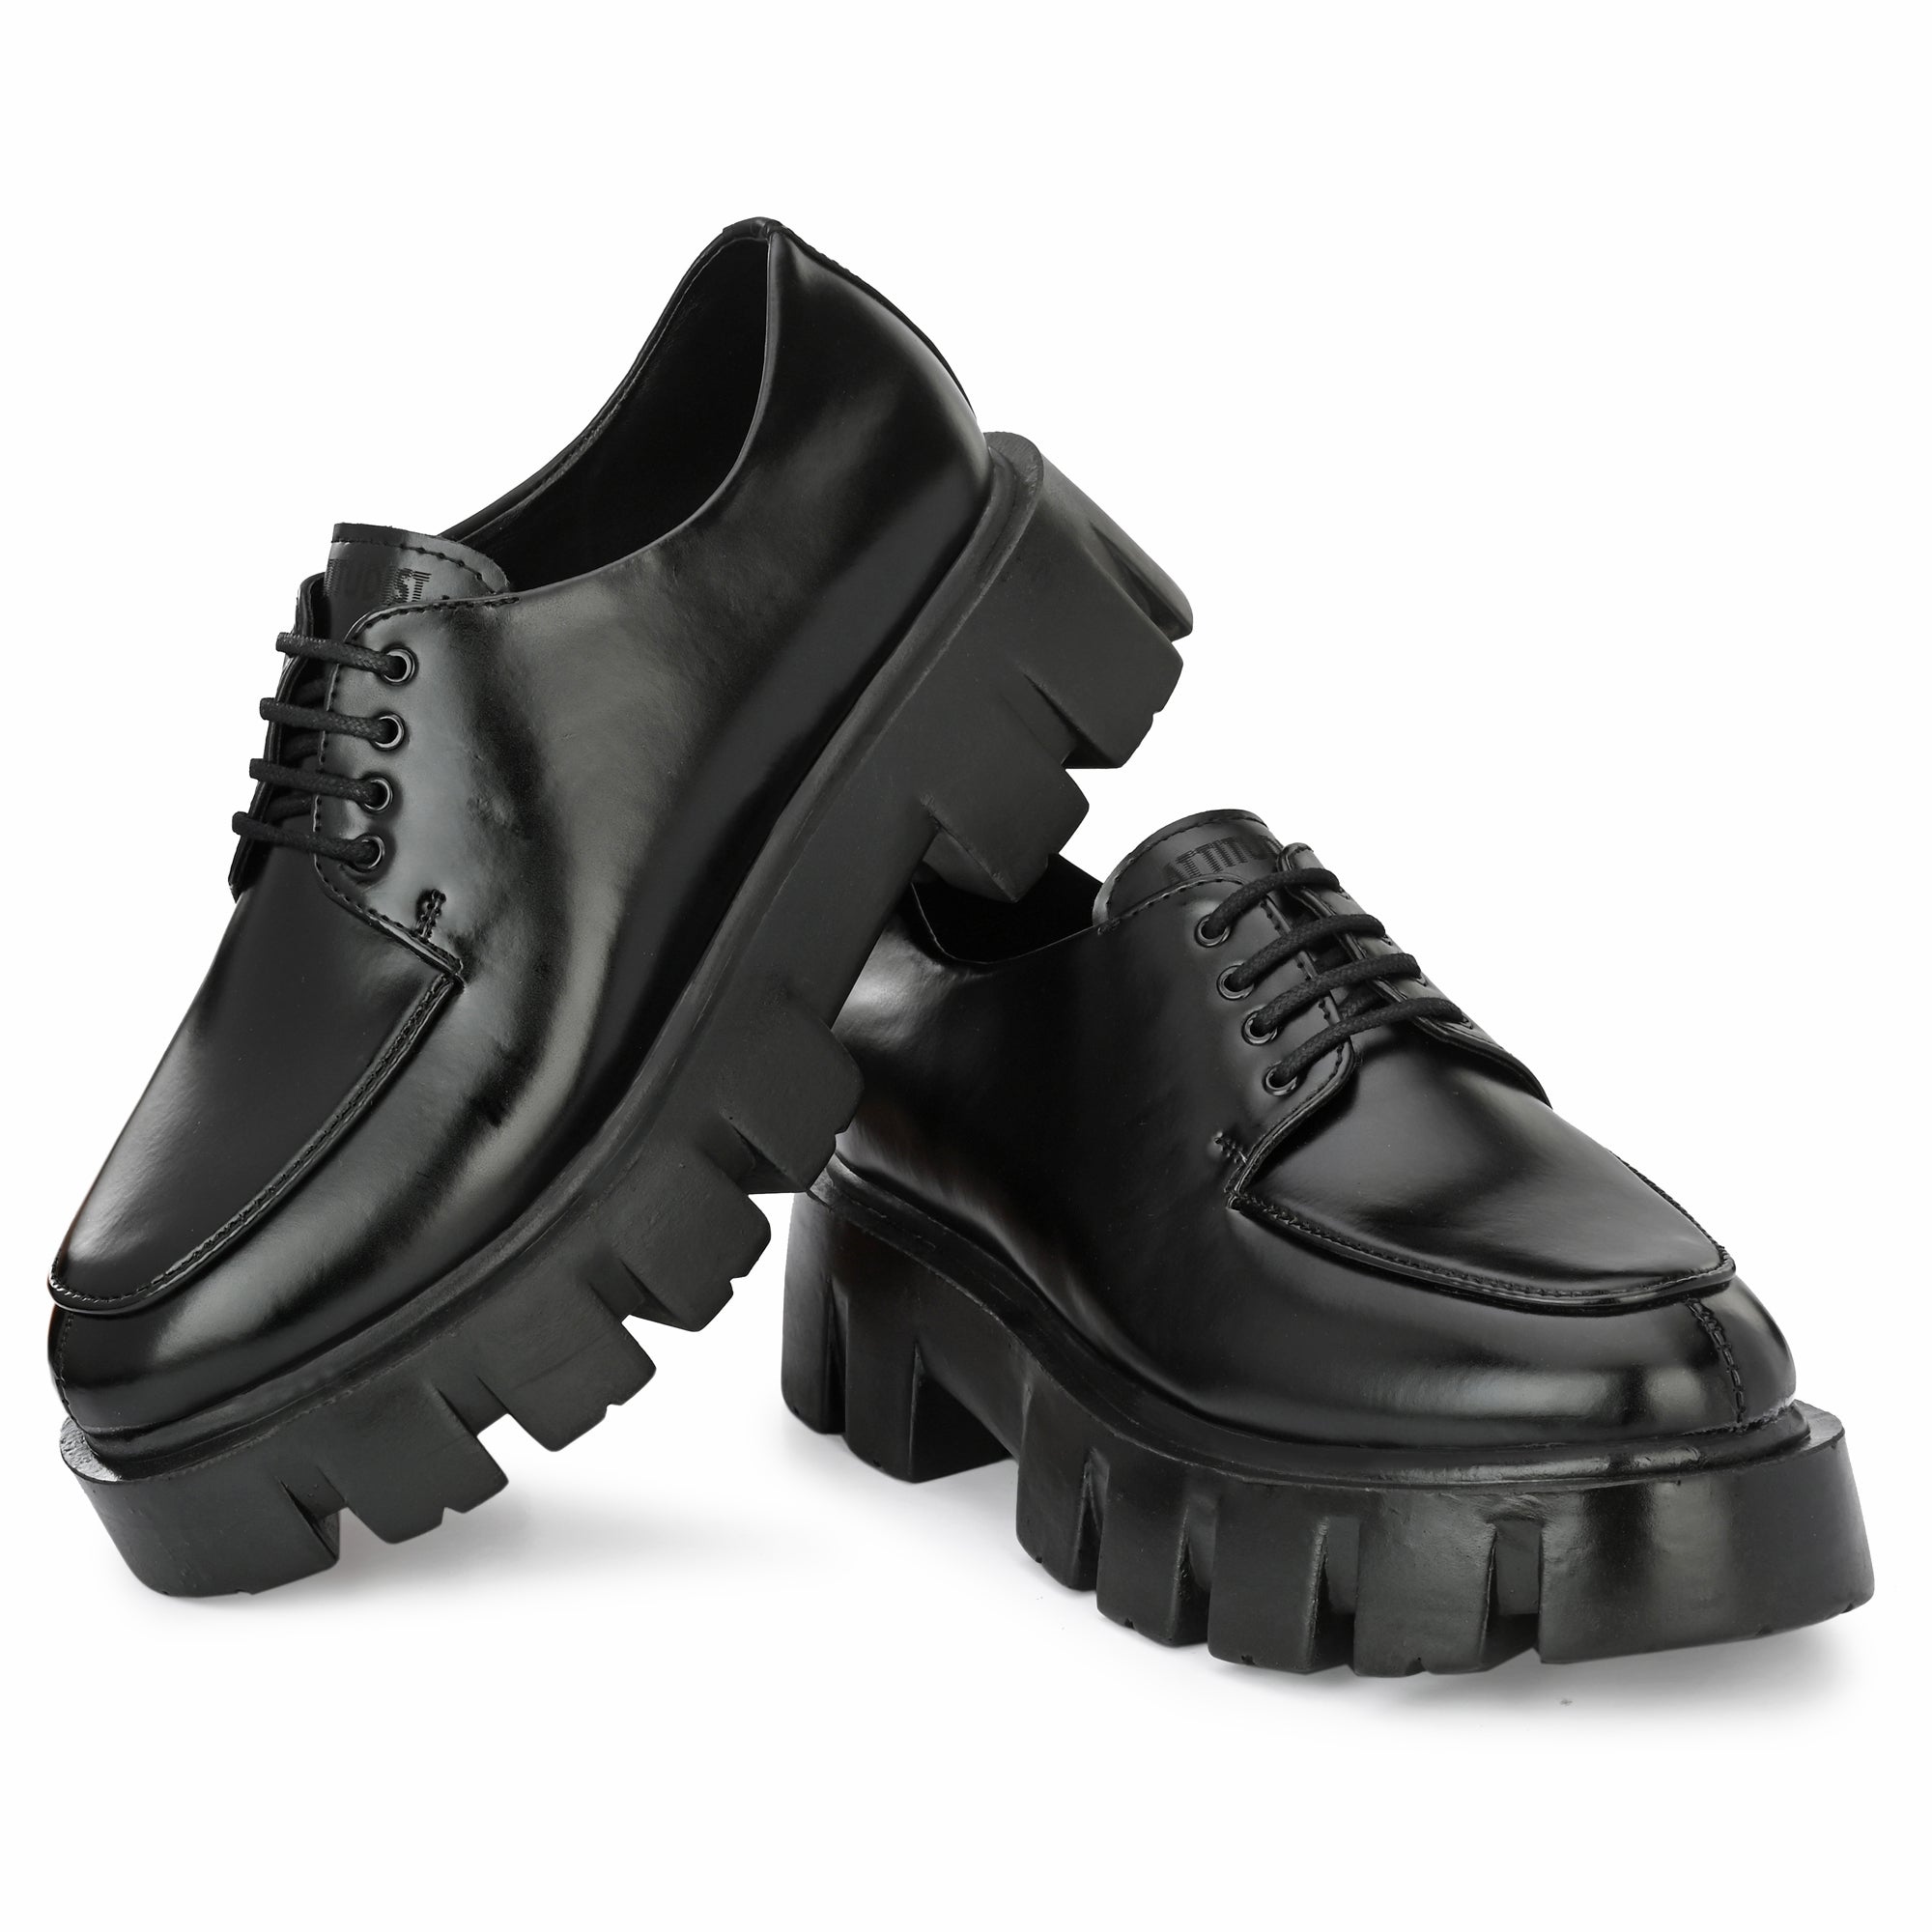 Hidden High Heel Shoes - Sneakers To Increase Height - Black Casual Sneakers  For Men 7 CM / 2.76 Inches